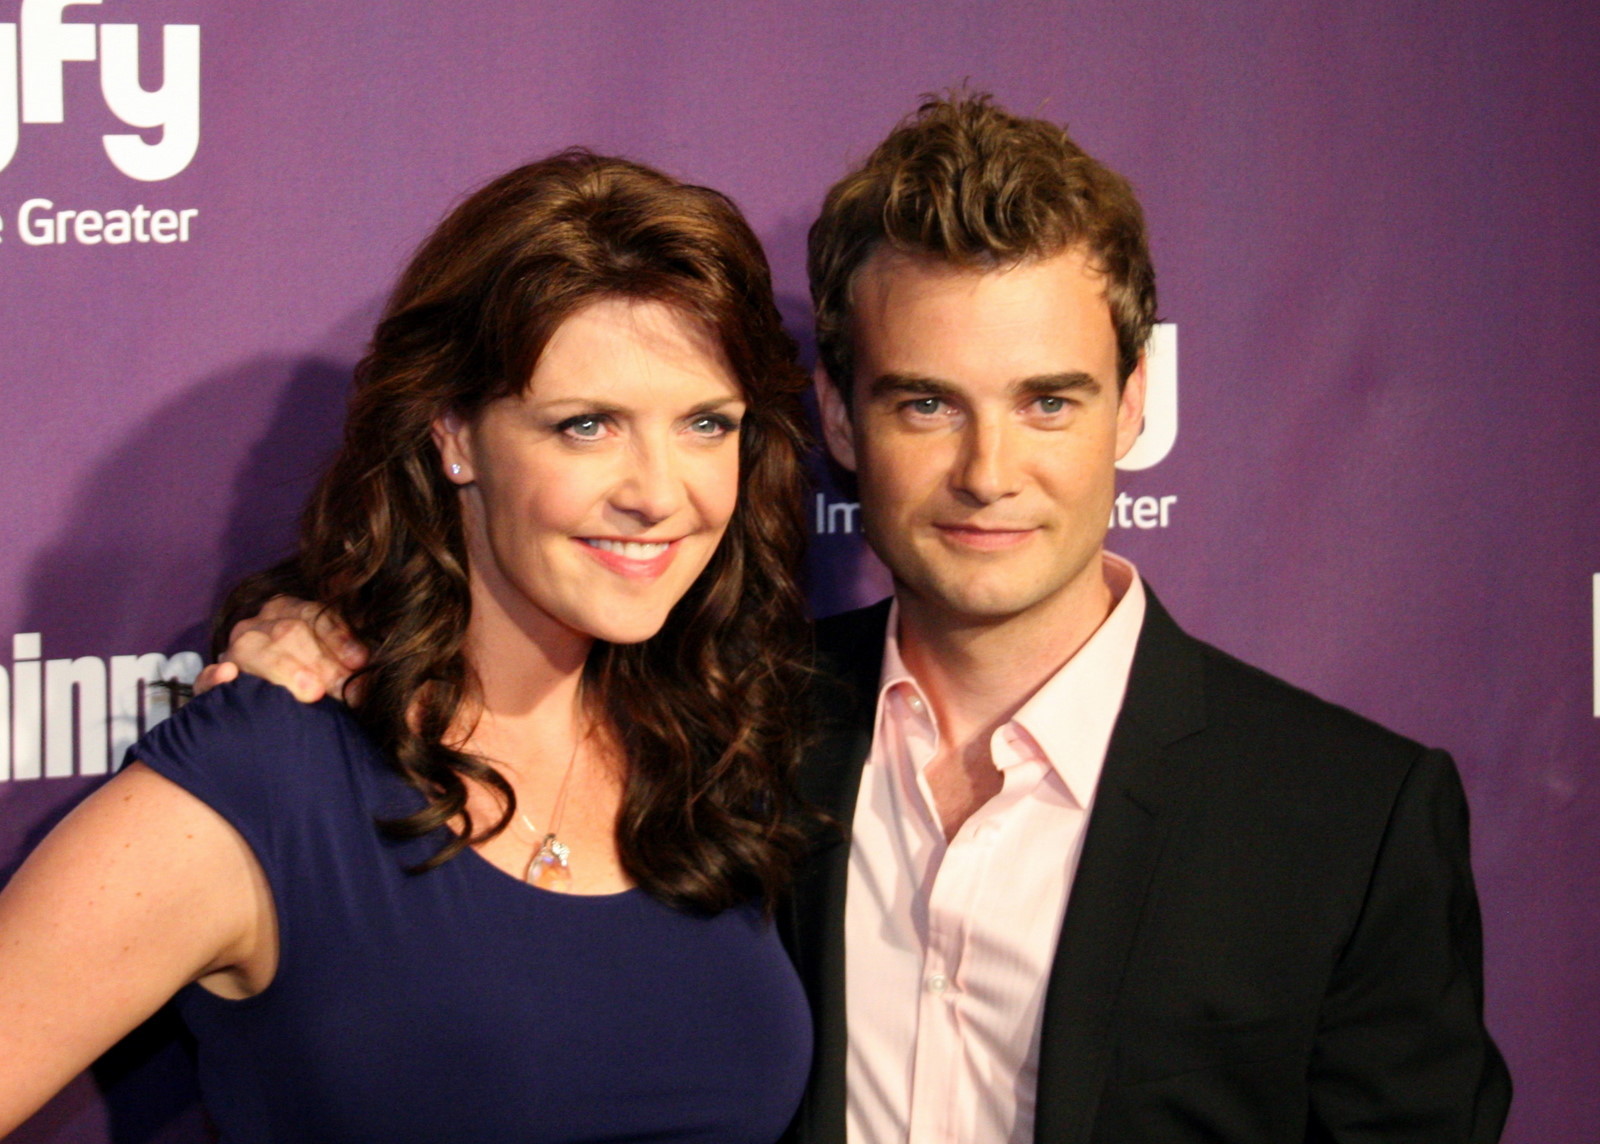 Robin Dunne and Amanda Tapping